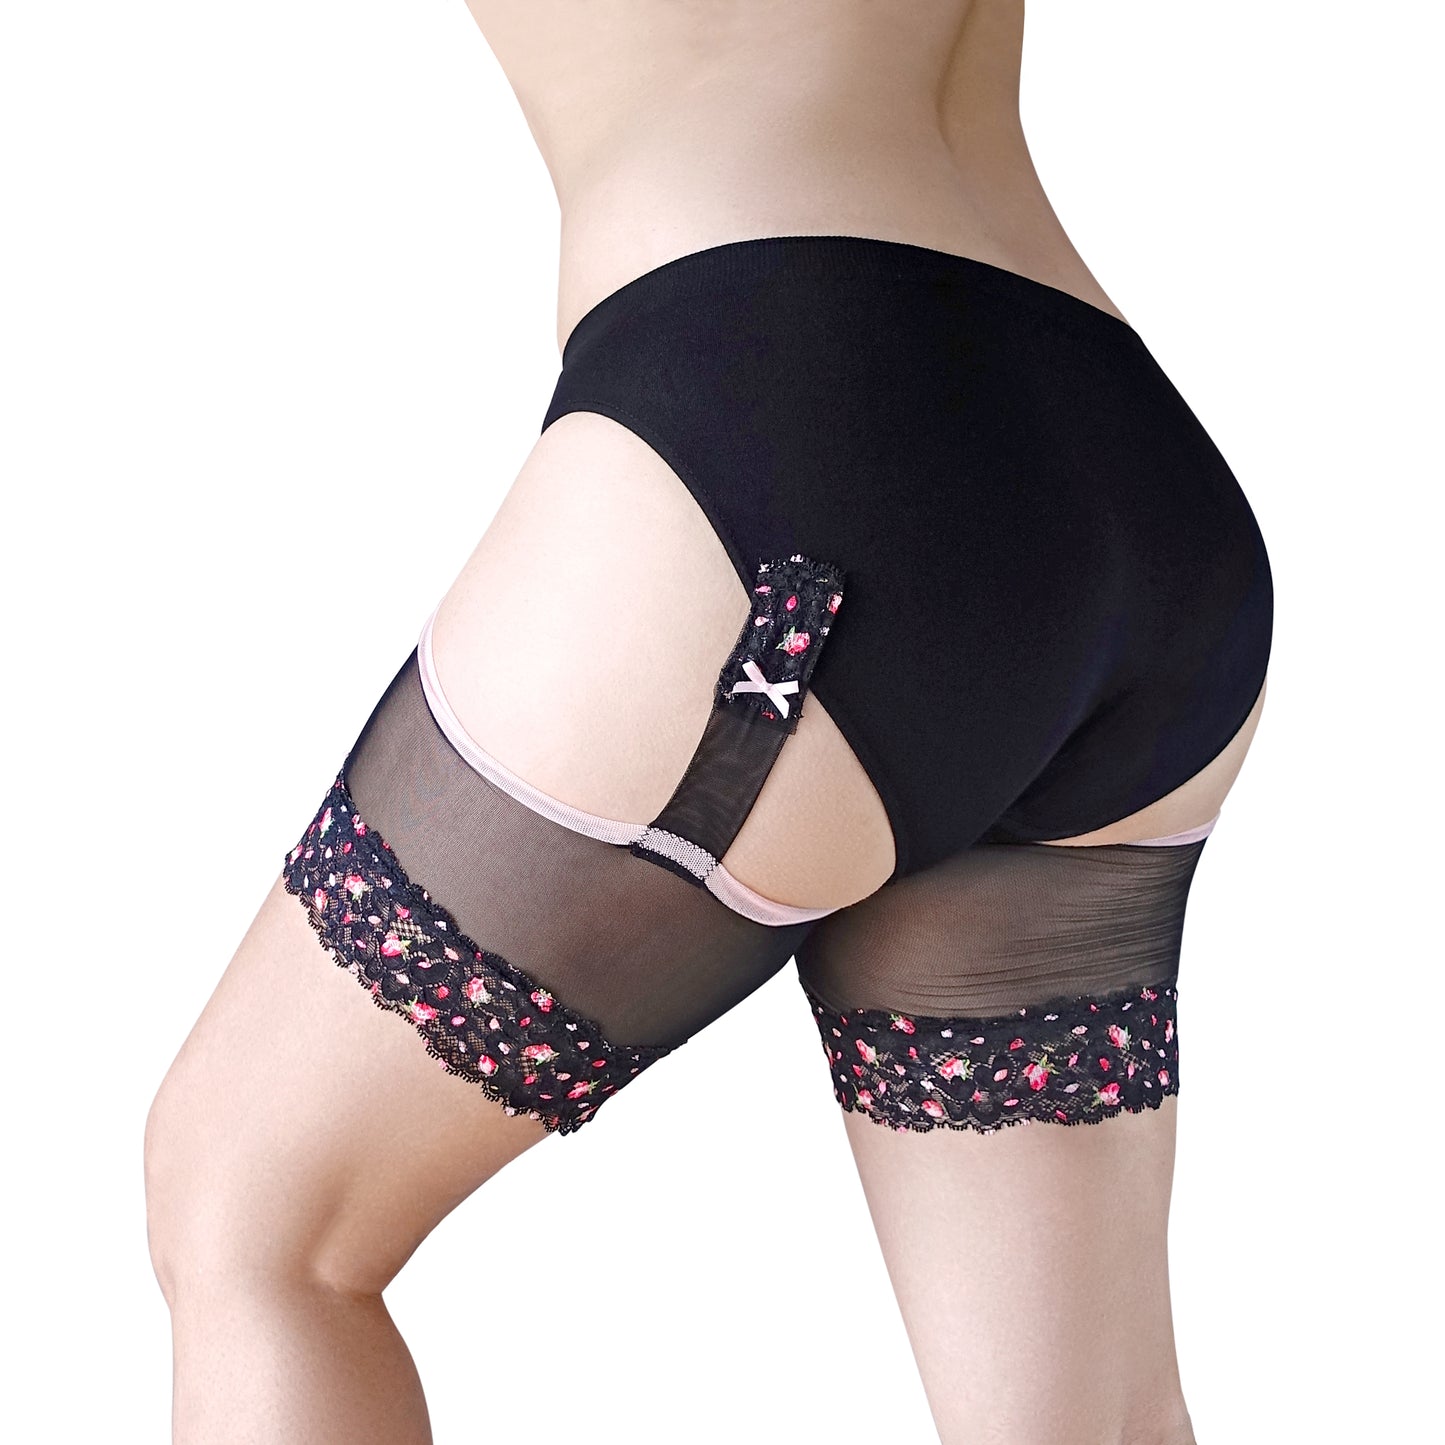 ANTI CHAFE Clip-On Thigh Bands - ROSEBUDS